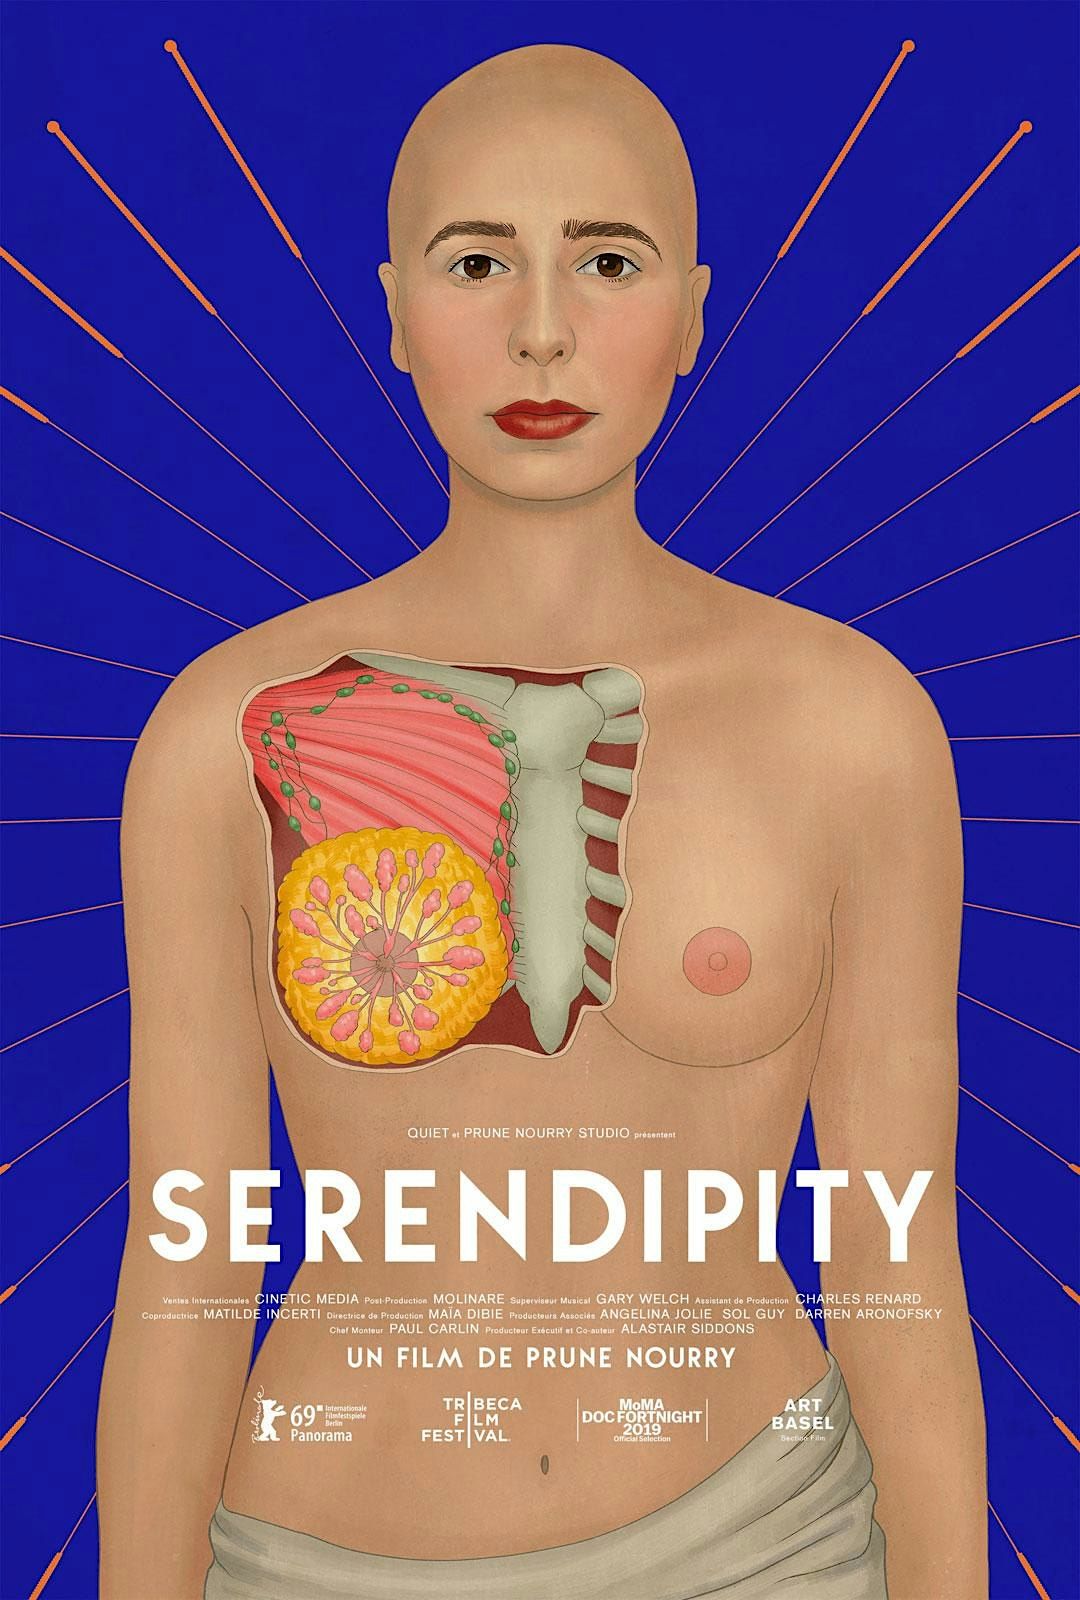 Screening of "Serendipity" by P. Nourry